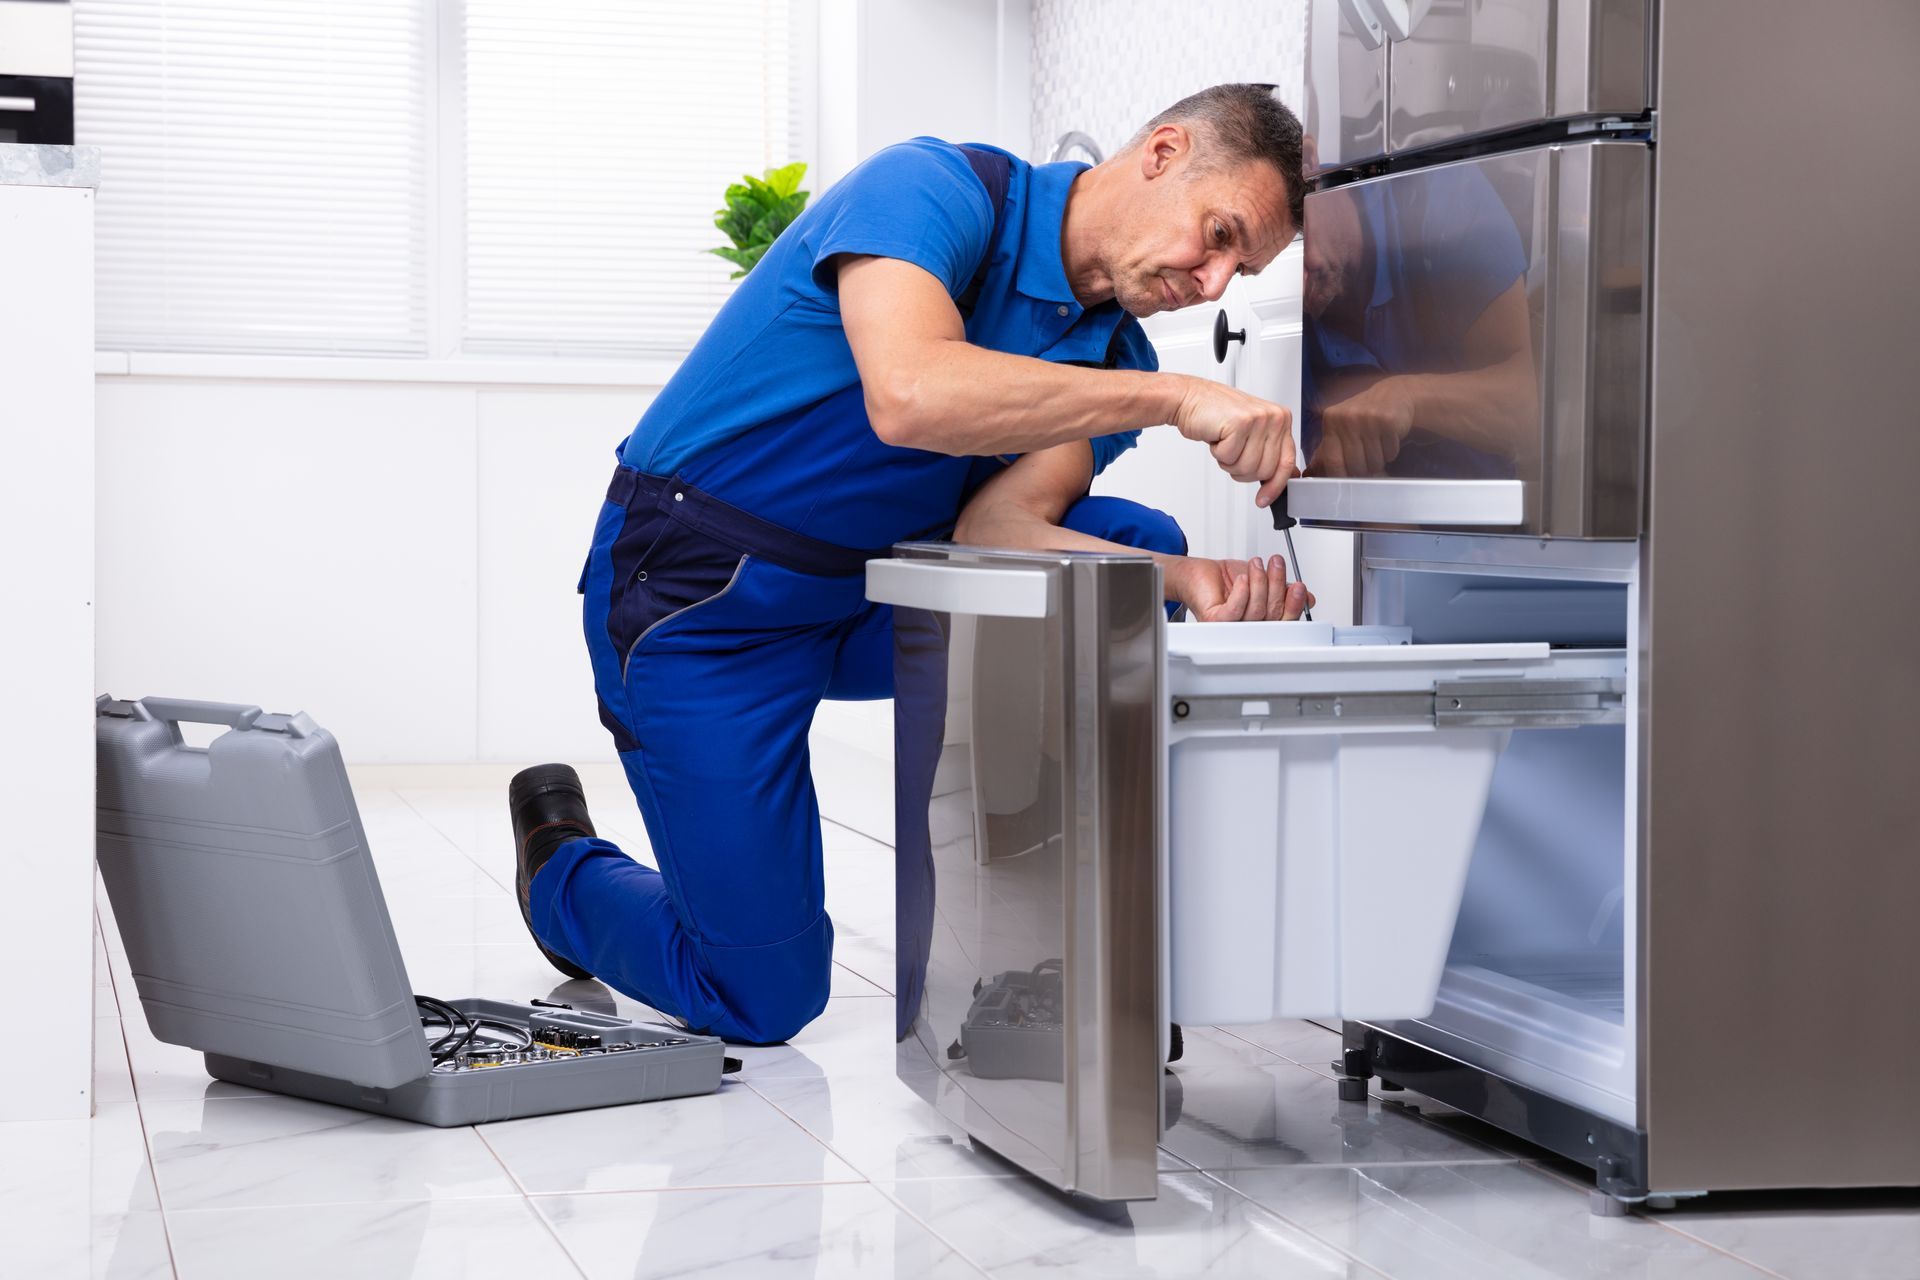 A man is kneeling down fixing a refrigerator in a kitchen.